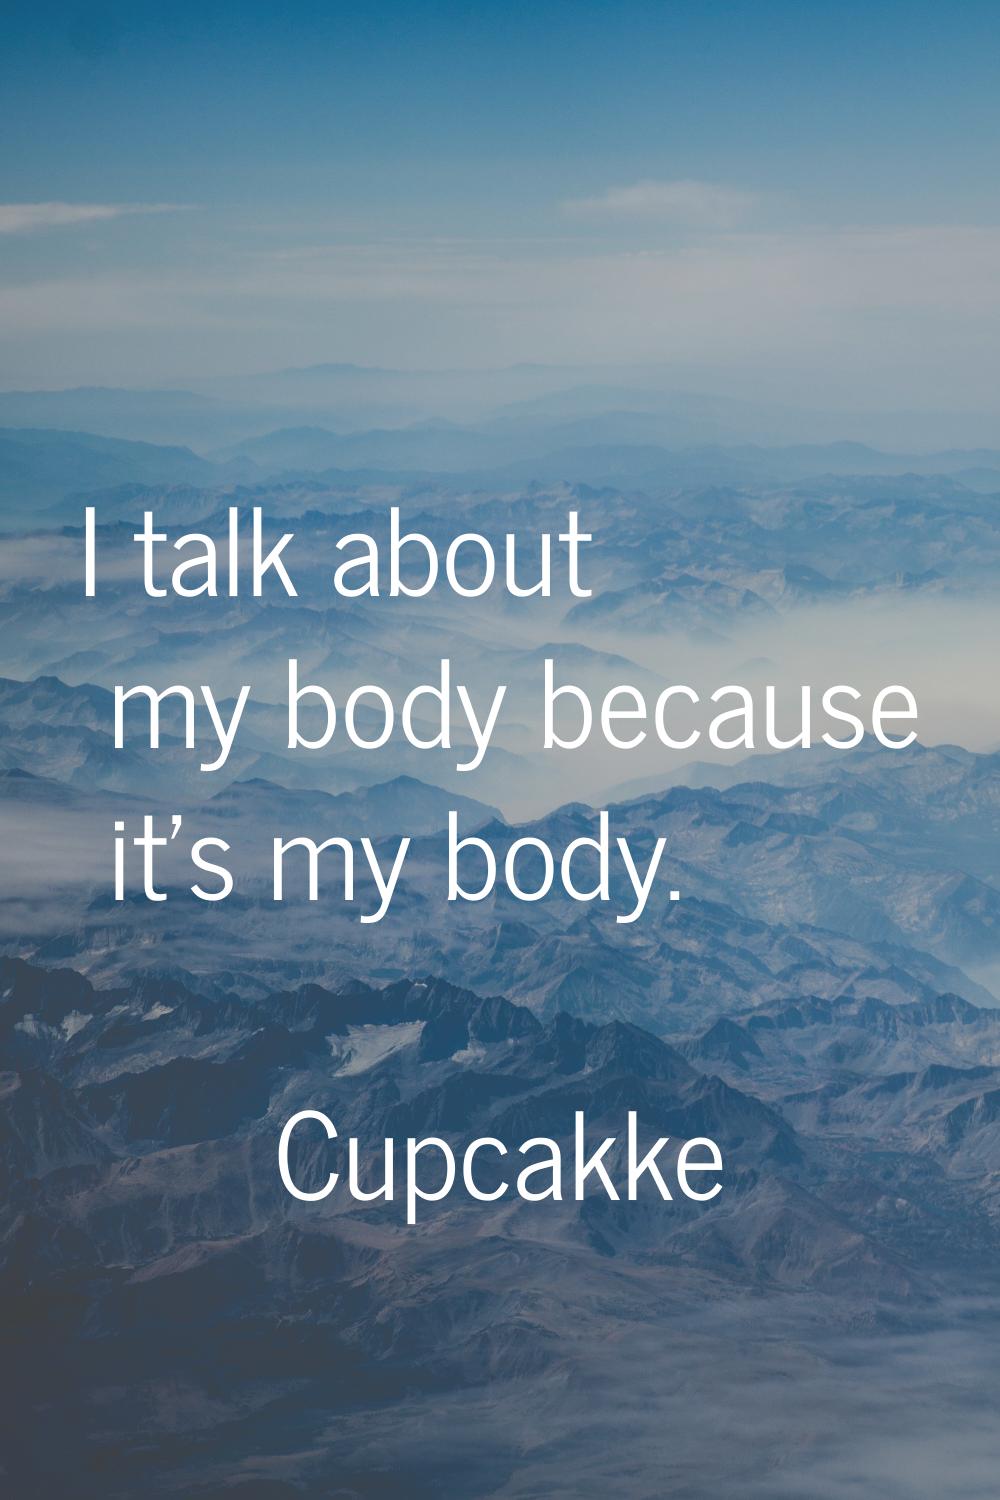 I talk about my body because it's my body.